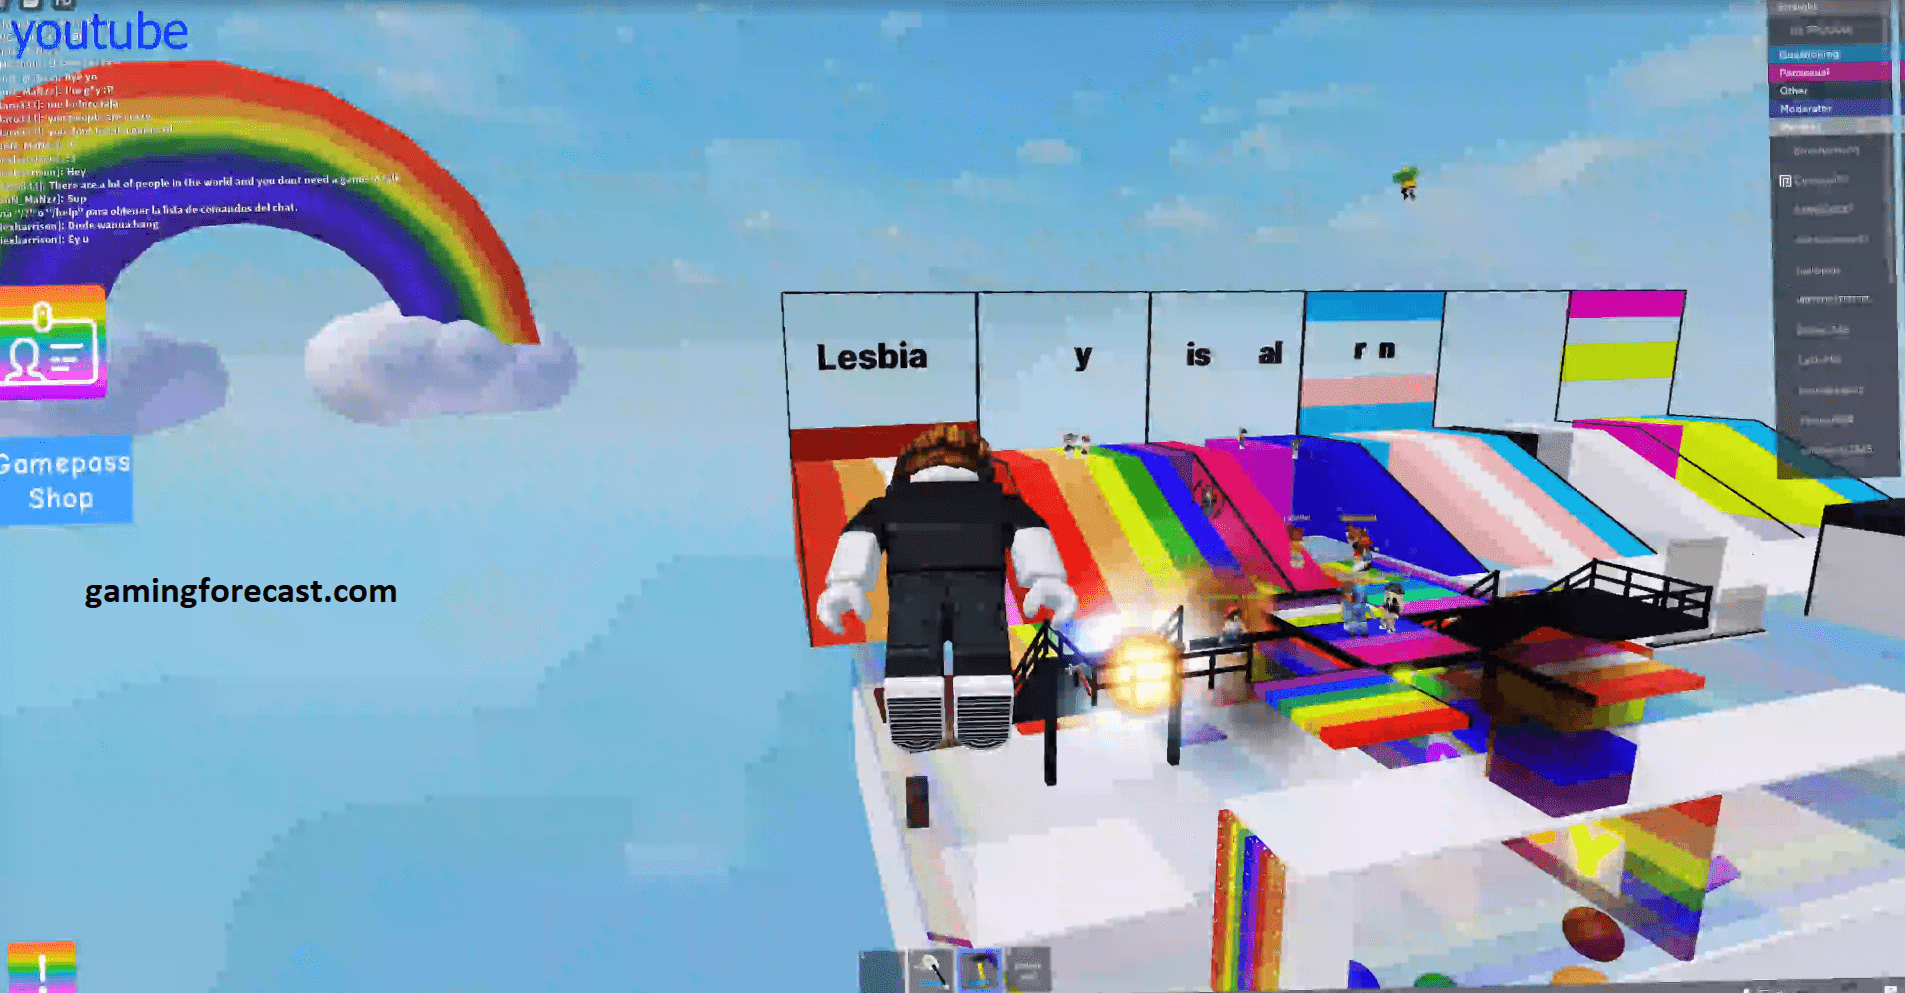 Roblox Hack Download Pc Destroy Lobby Fly Aimbot Scripts 2021 Gaming Forecast Download Free Online Game Hacks - roblox aimbot esp script